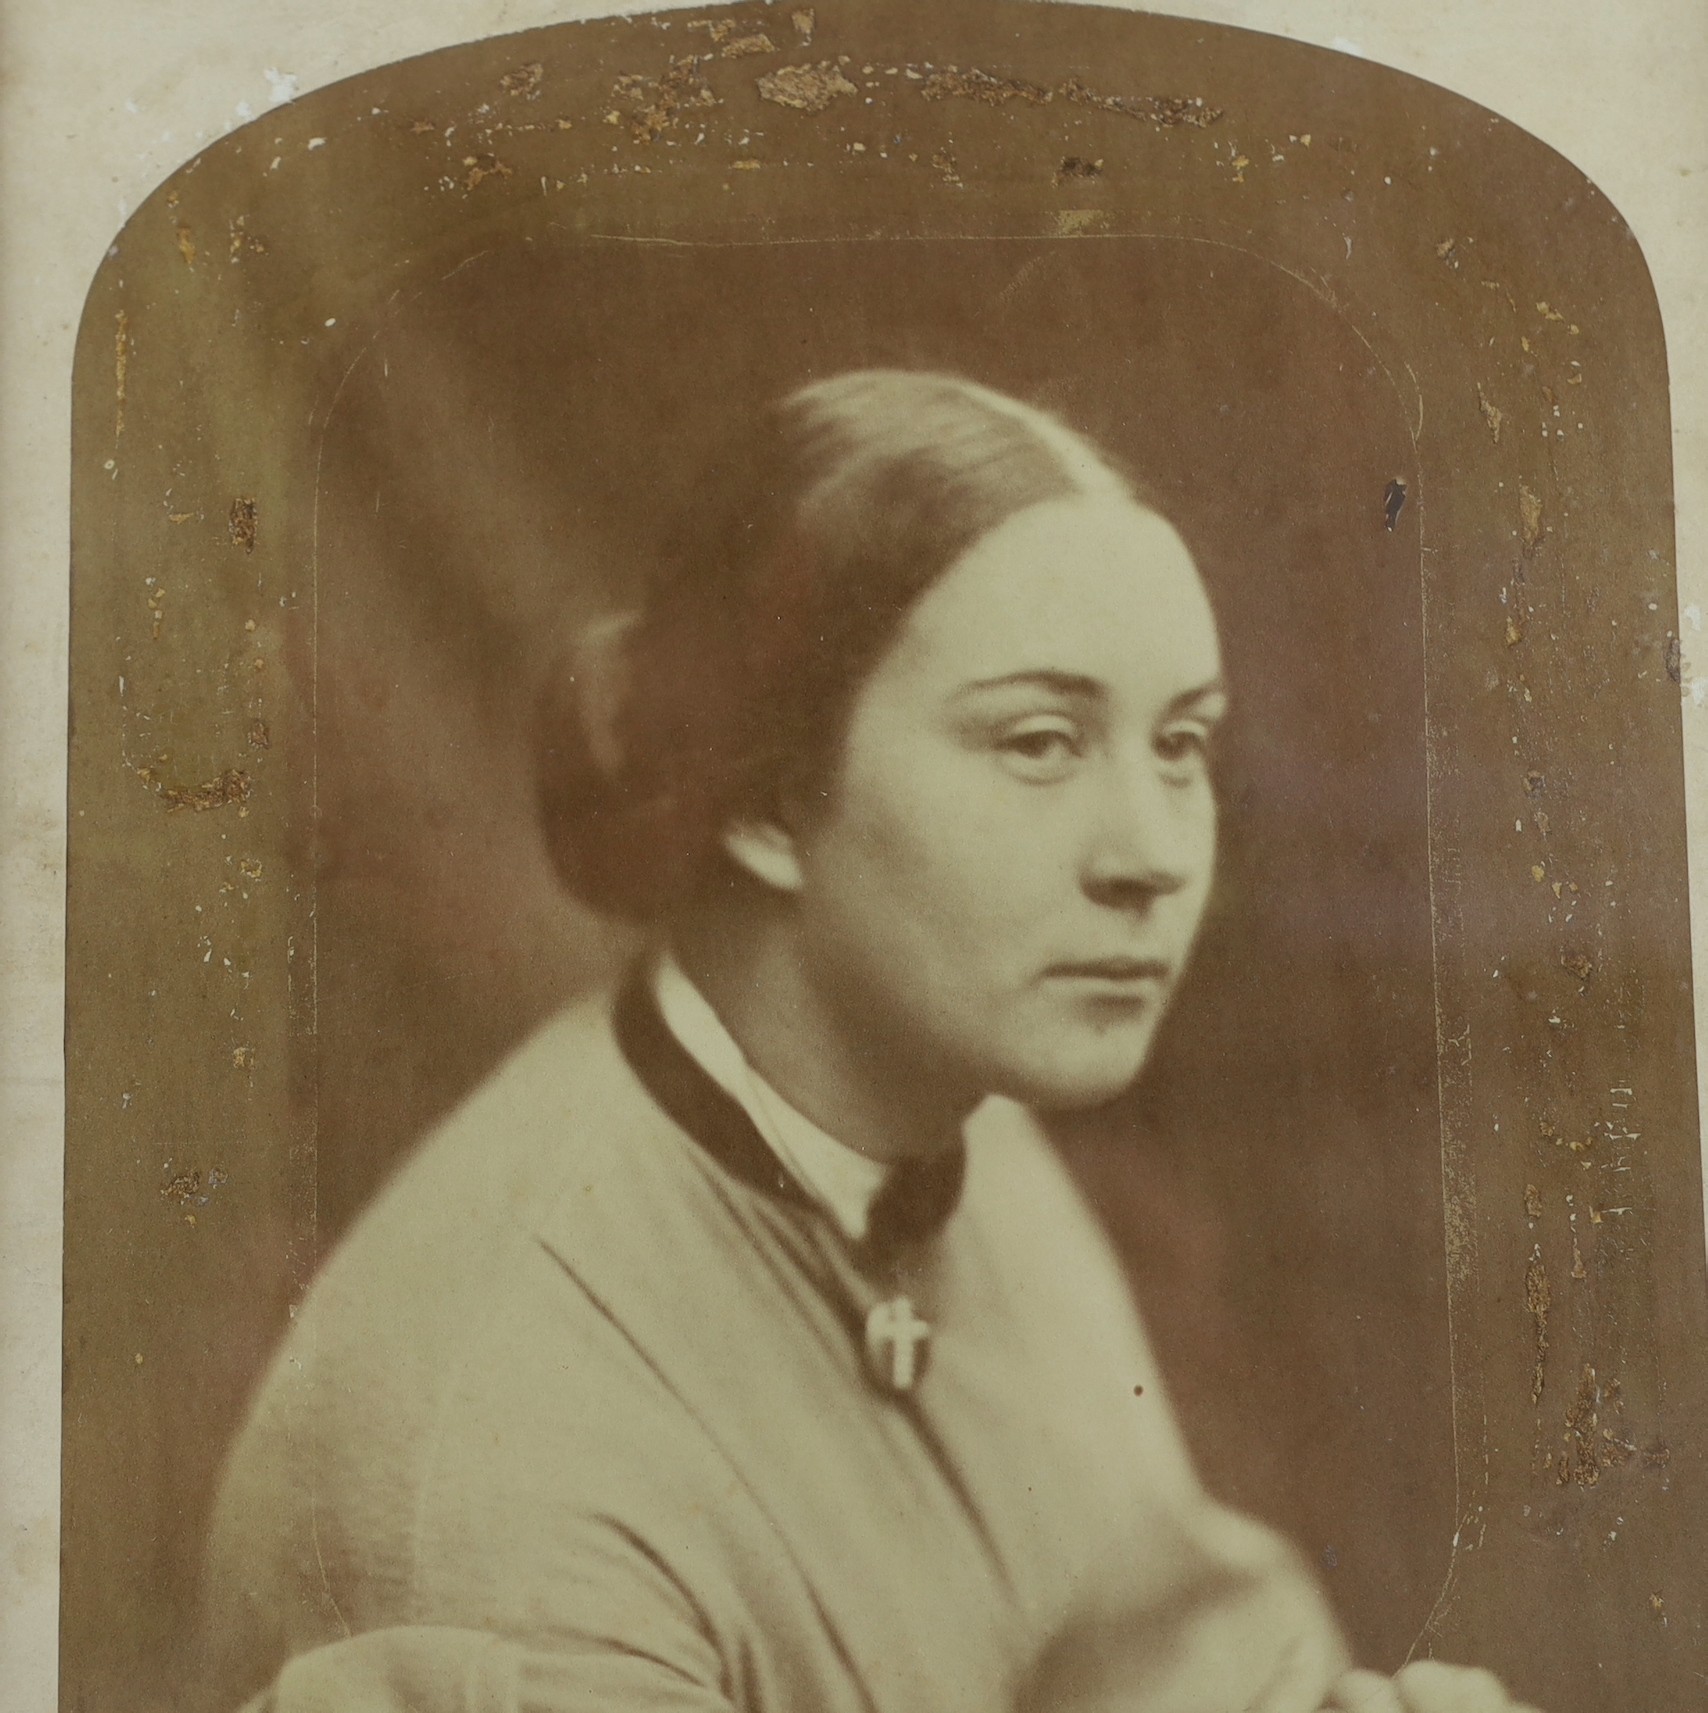 Julia Margaret Cameron (1815-1879) - Portrait of Blanche Vere Guest (1847-1919), (from 1875 The Countess of Bessborough), - an albumen print mounted on card, image 25.5 x 20.9cm